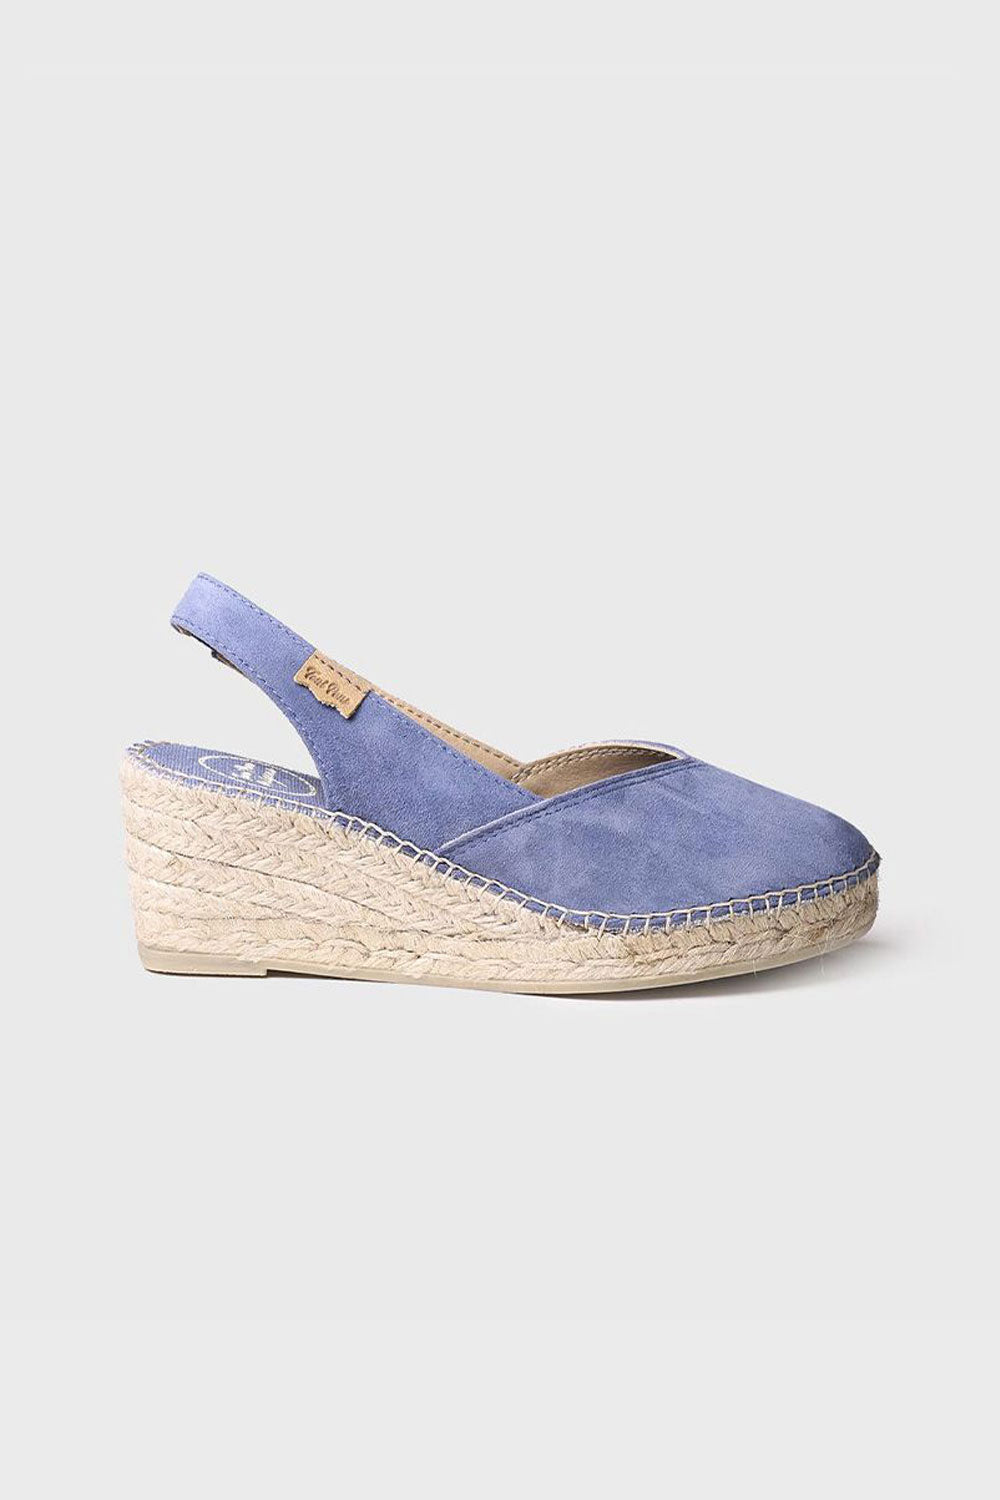 "BETTY A" Closed wedge espadrilles